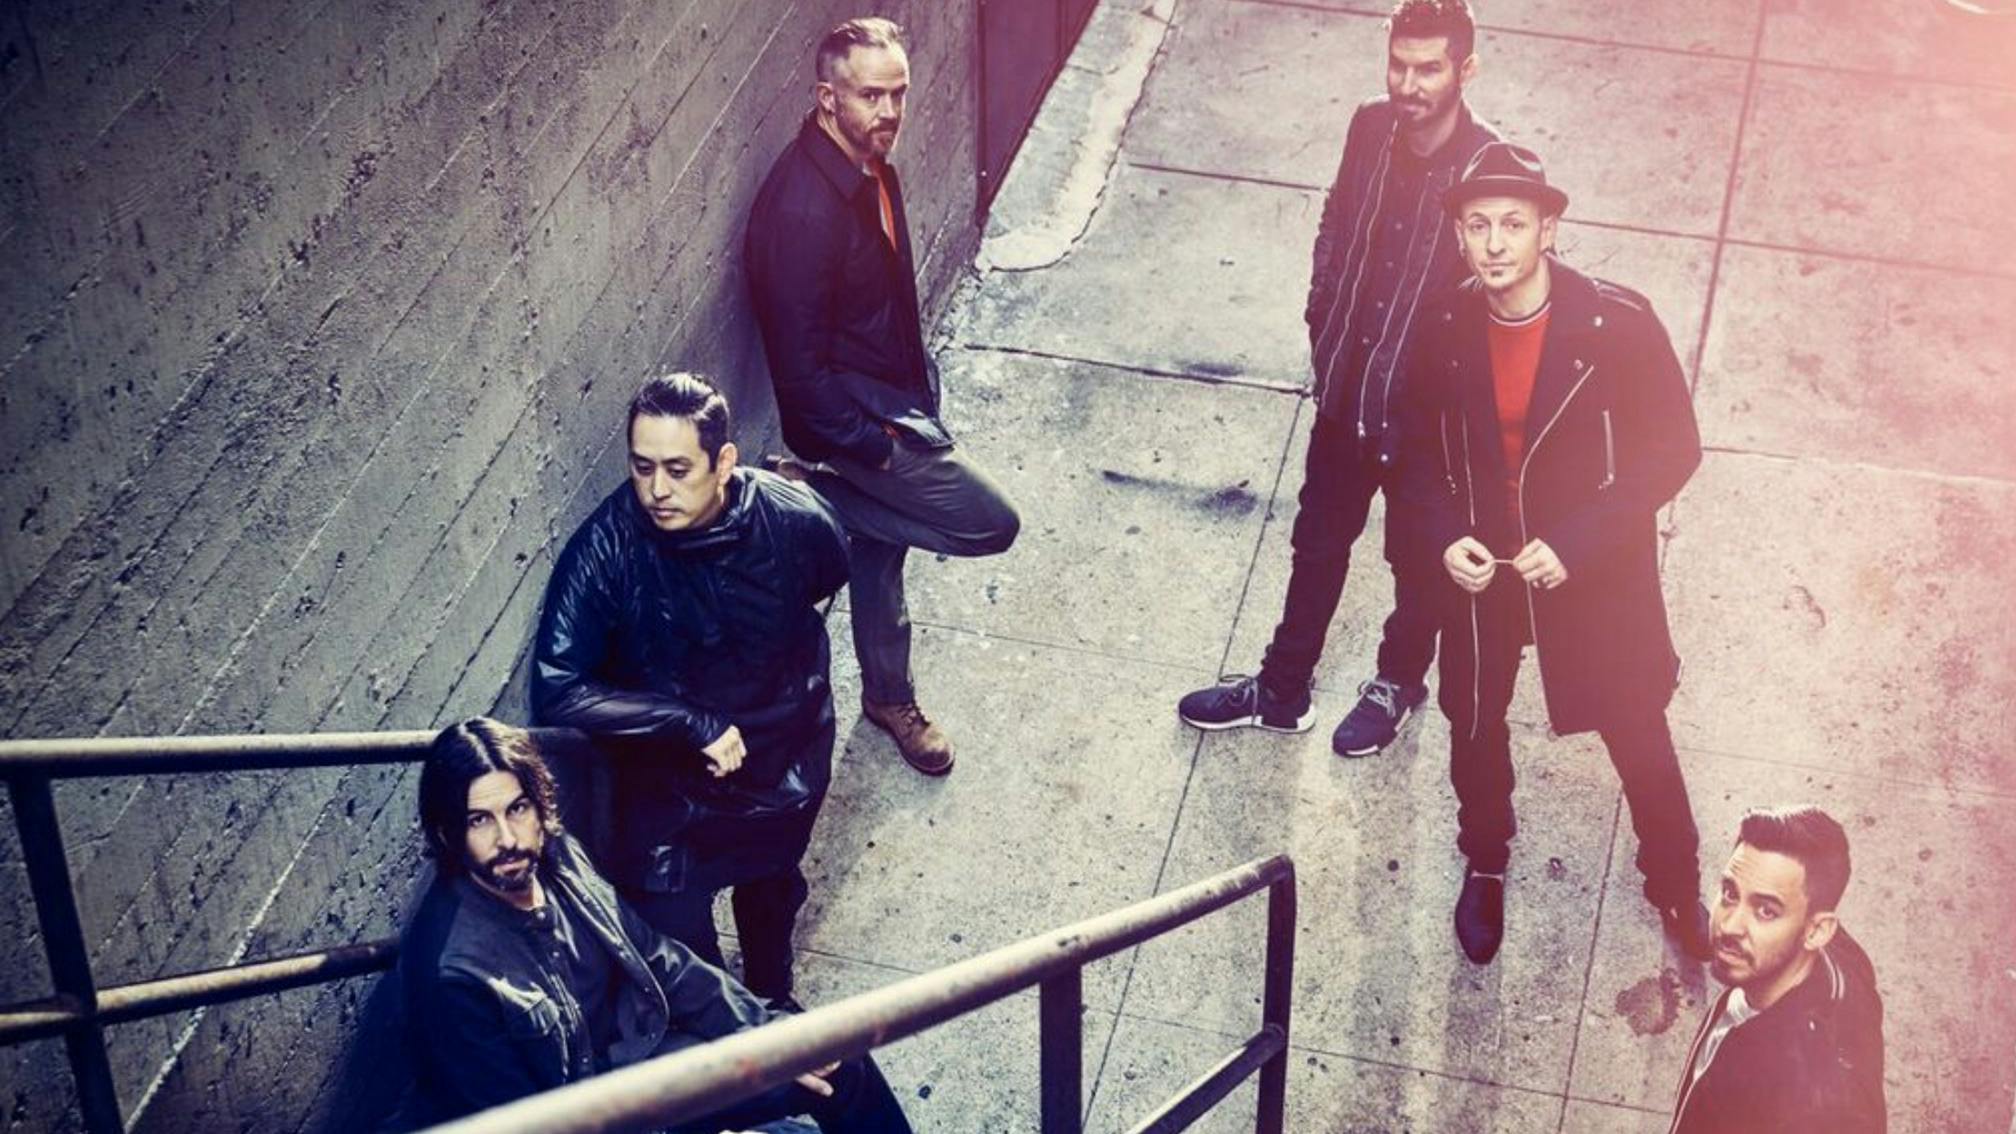 The shifting seasons of Linkin Park, as told through their iconic music videos